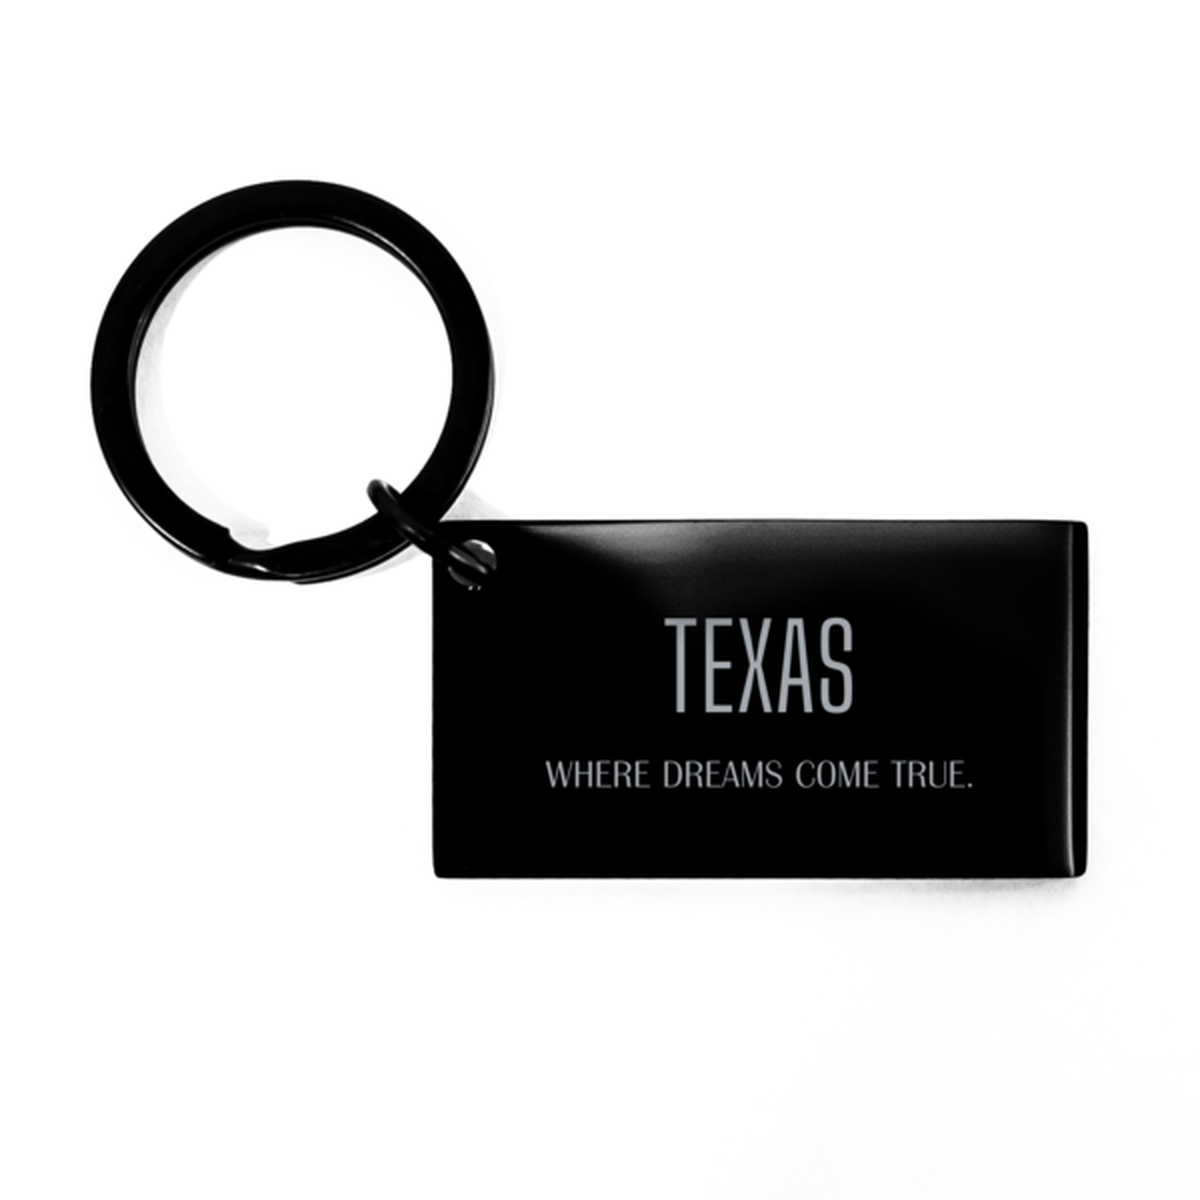 Love Texas State Keychain, Texas Where dreams come true, Birthday Inspirational Gifts For Texas Men, Women, Friends